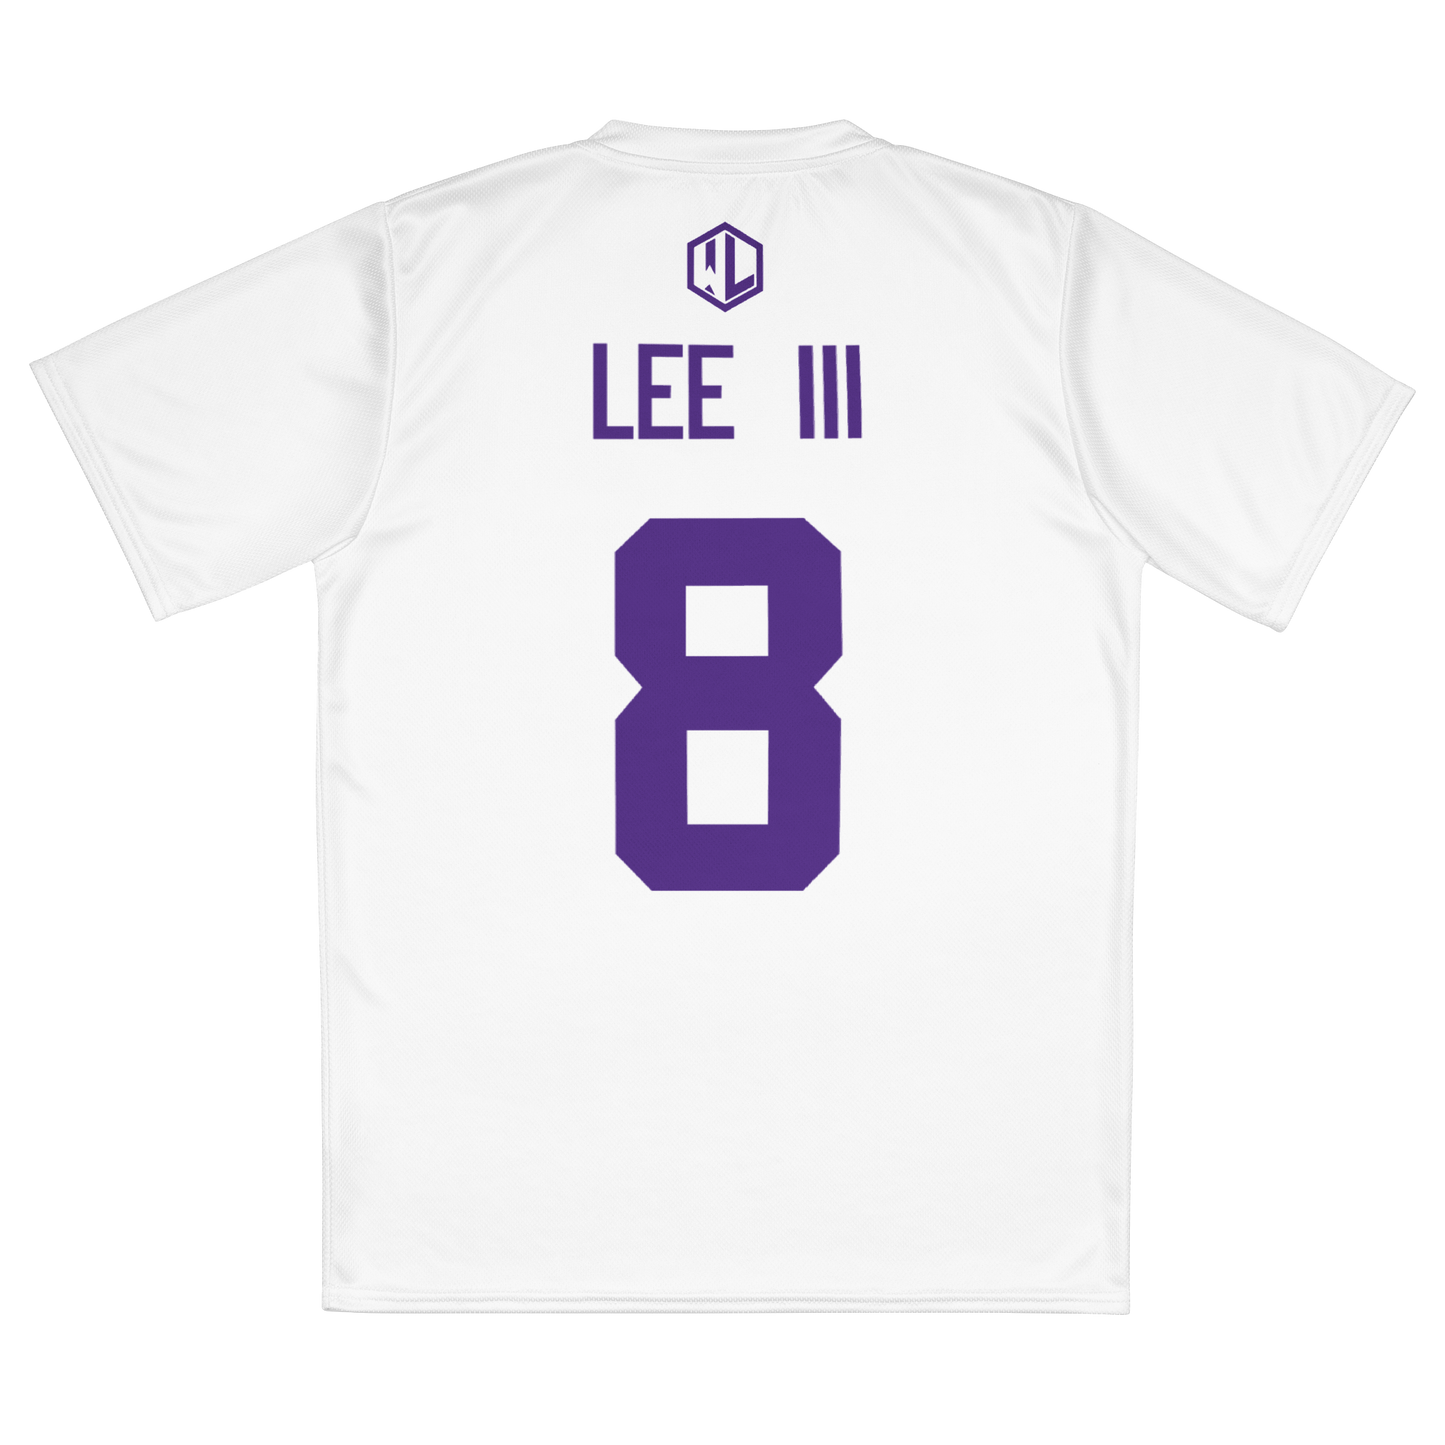 WILL LEE AWAY SHIRTSY